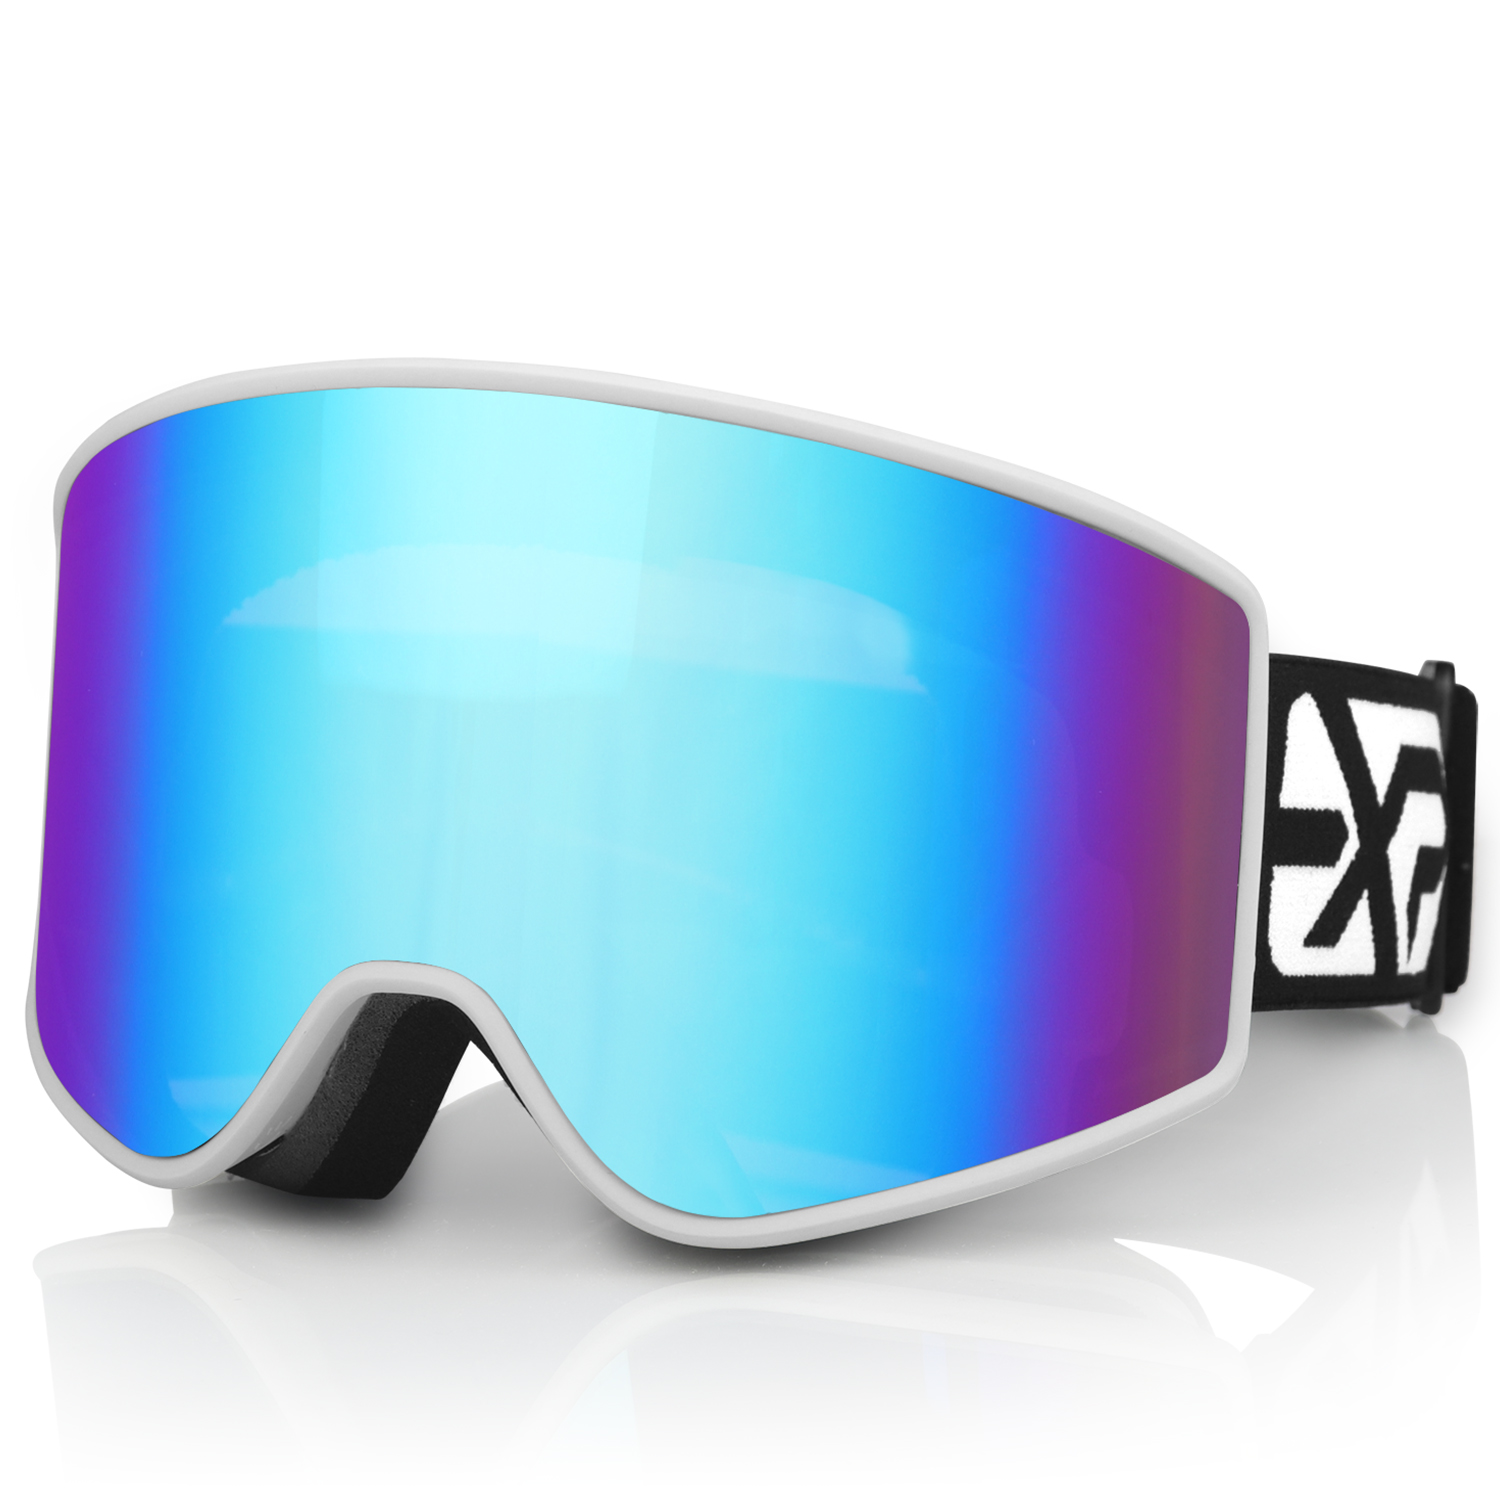 EXP VISION Family Style Ski Goggle for Audlt and Kids EX-5800